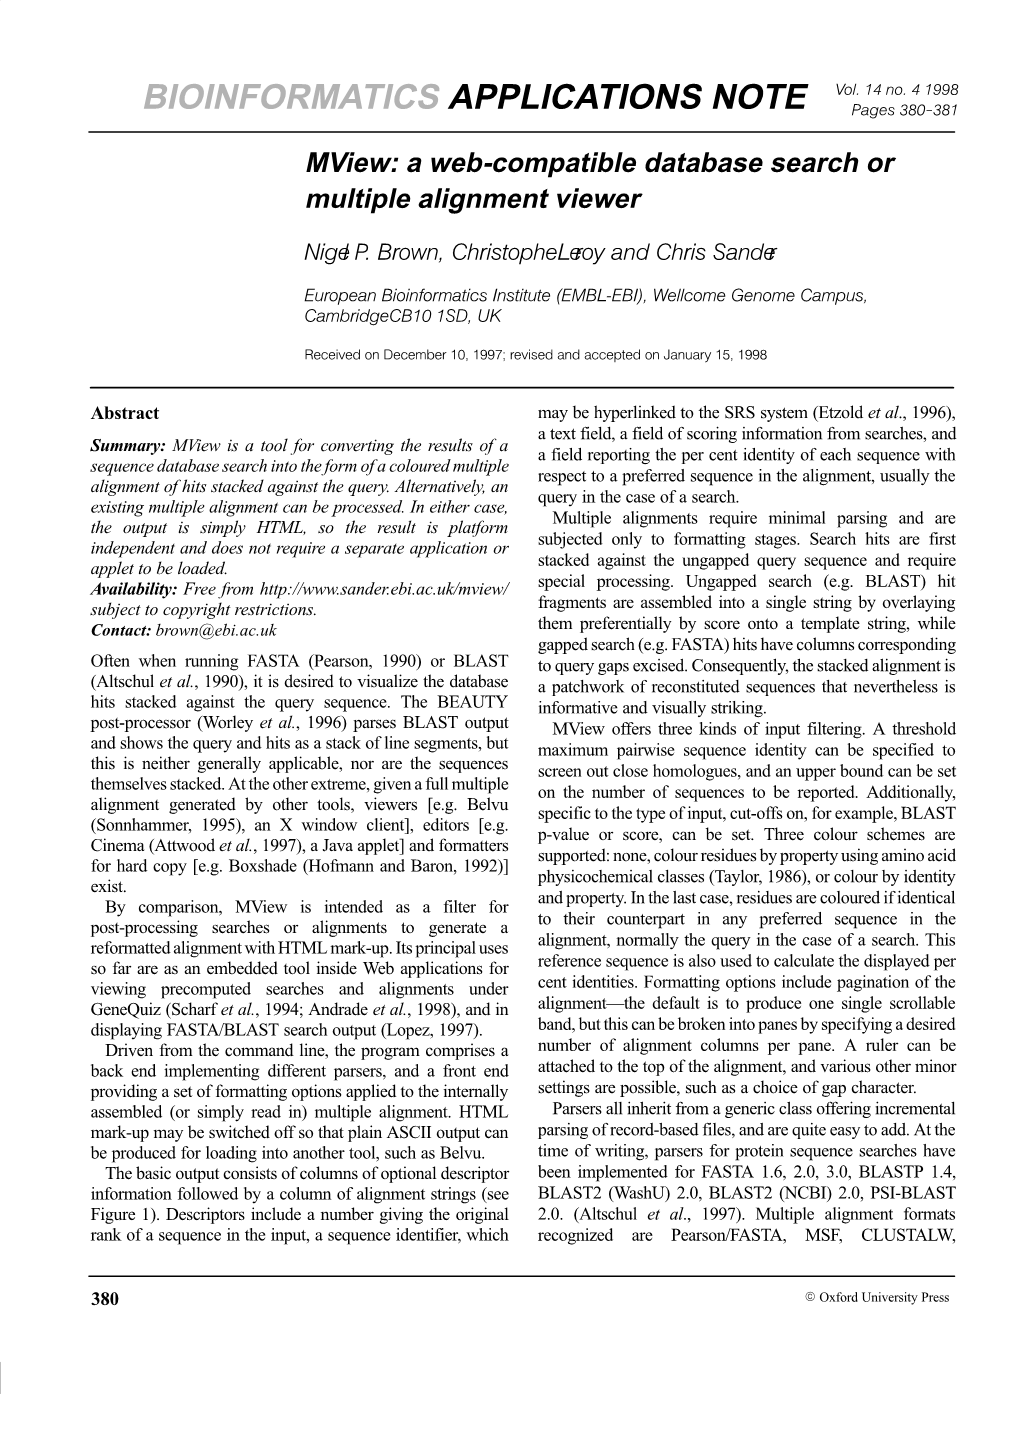 BIOINFORMATICS APPLICATIONS NOTE Pages 380-381